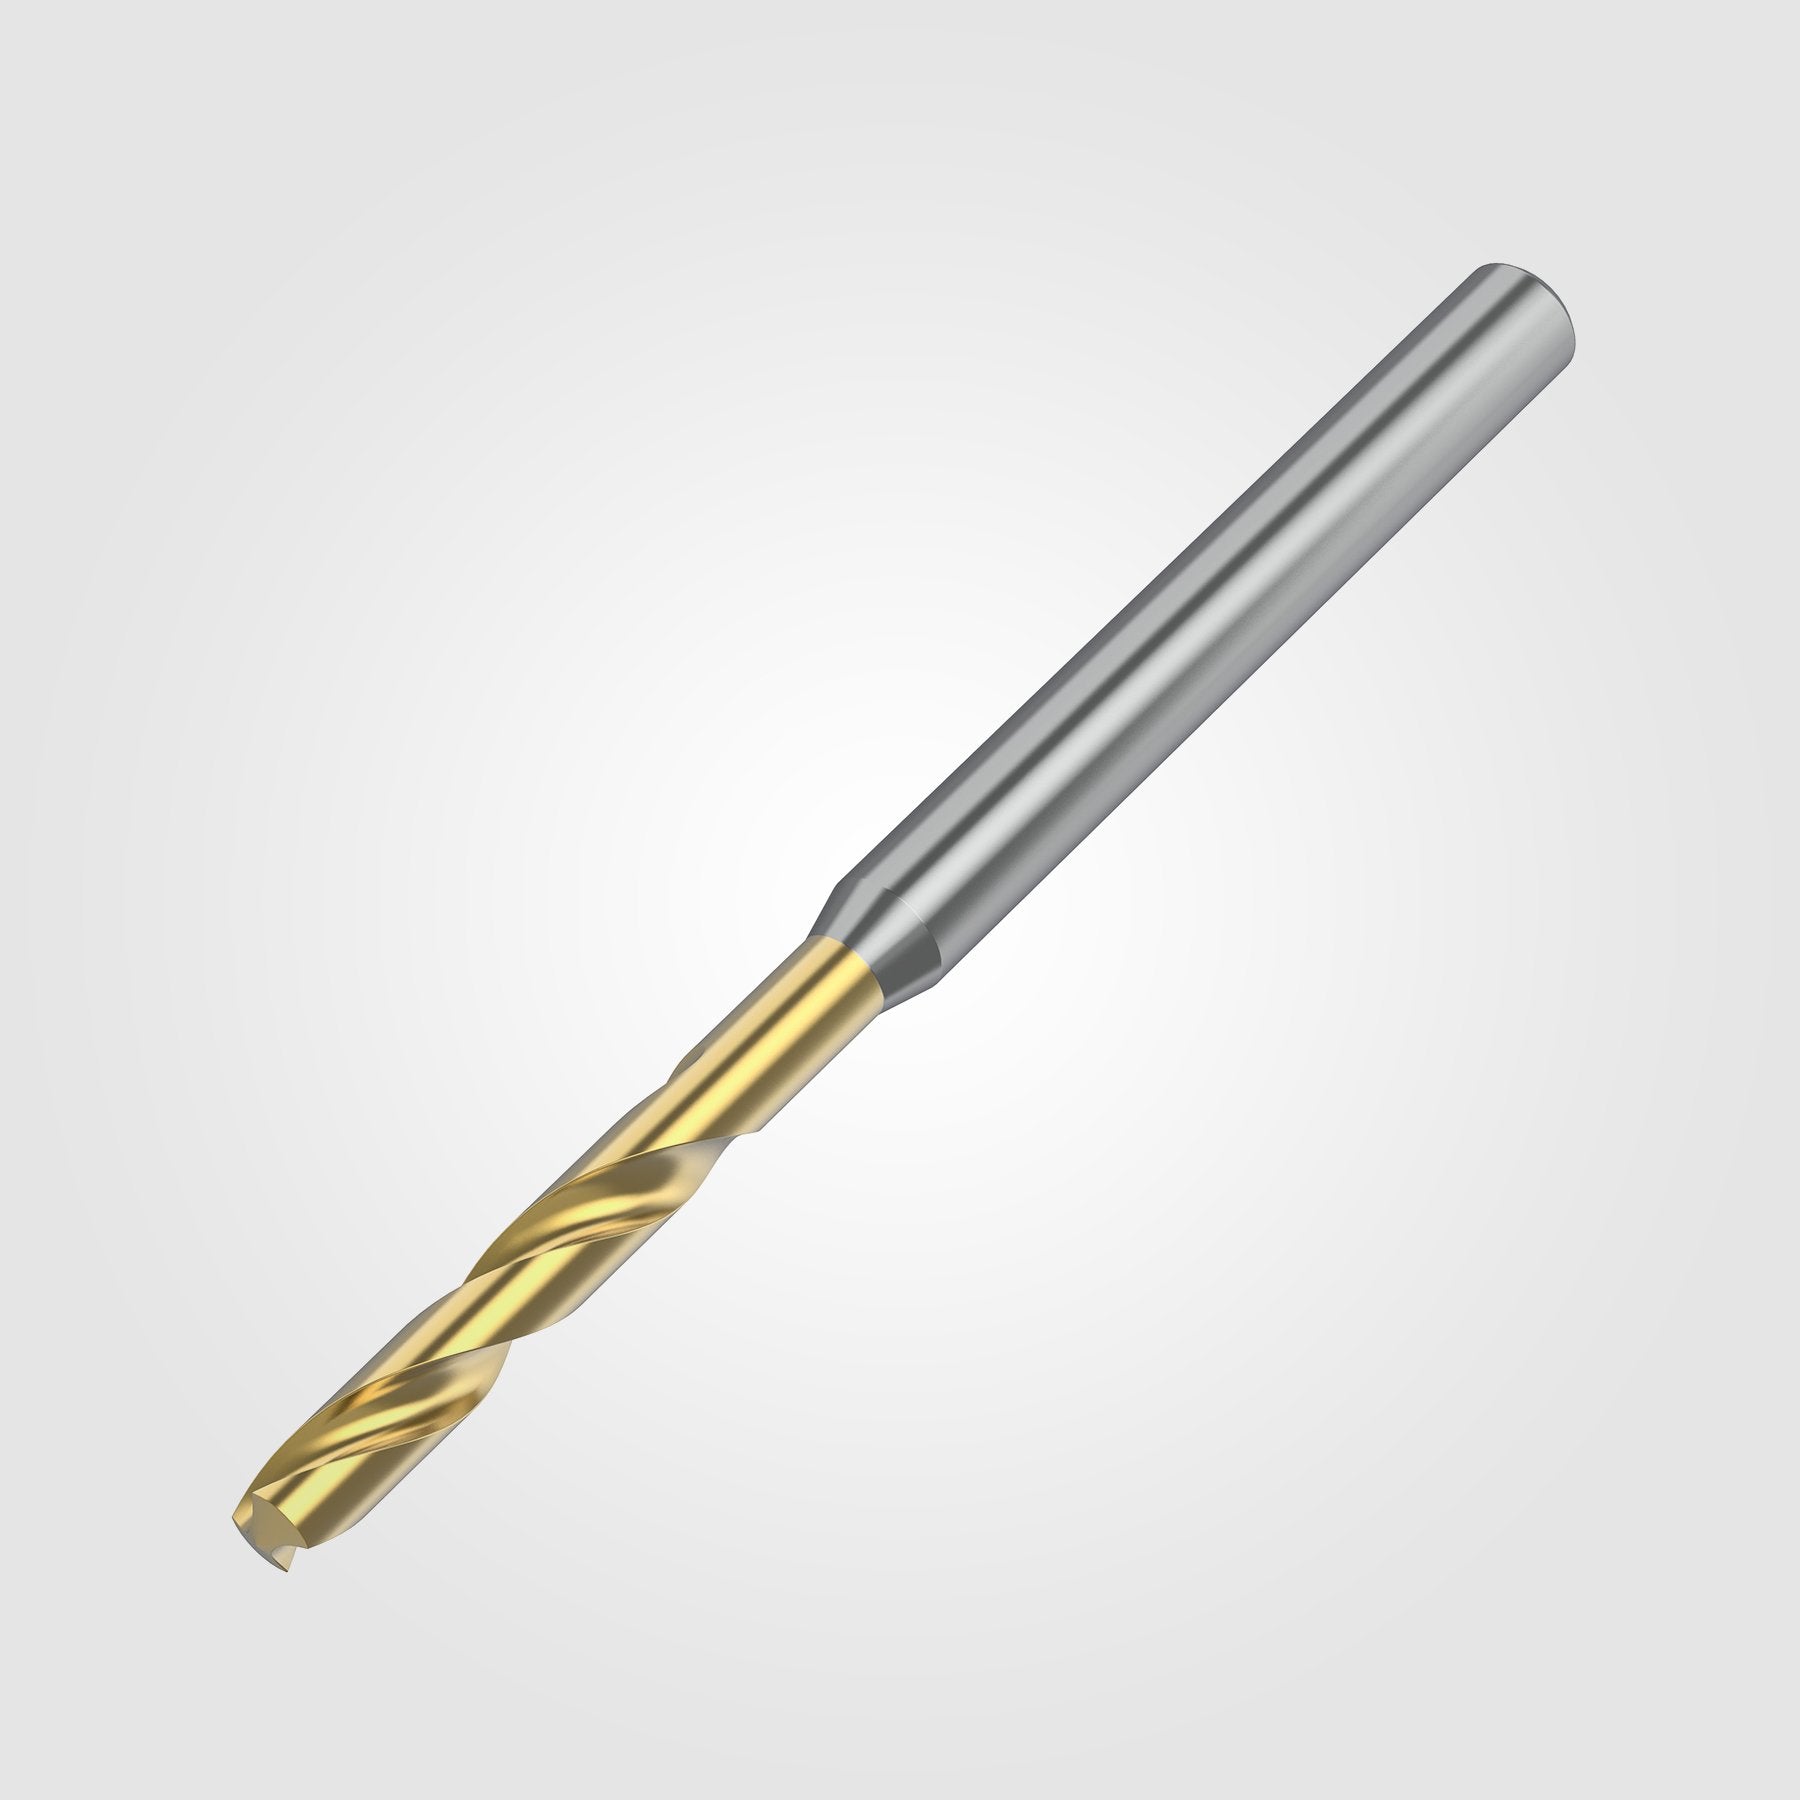 GOdrill (THROUGH COOLANT) | 6.3mm / .2480" / 5xD | SOLID CARBIDE DRILL | 4149229